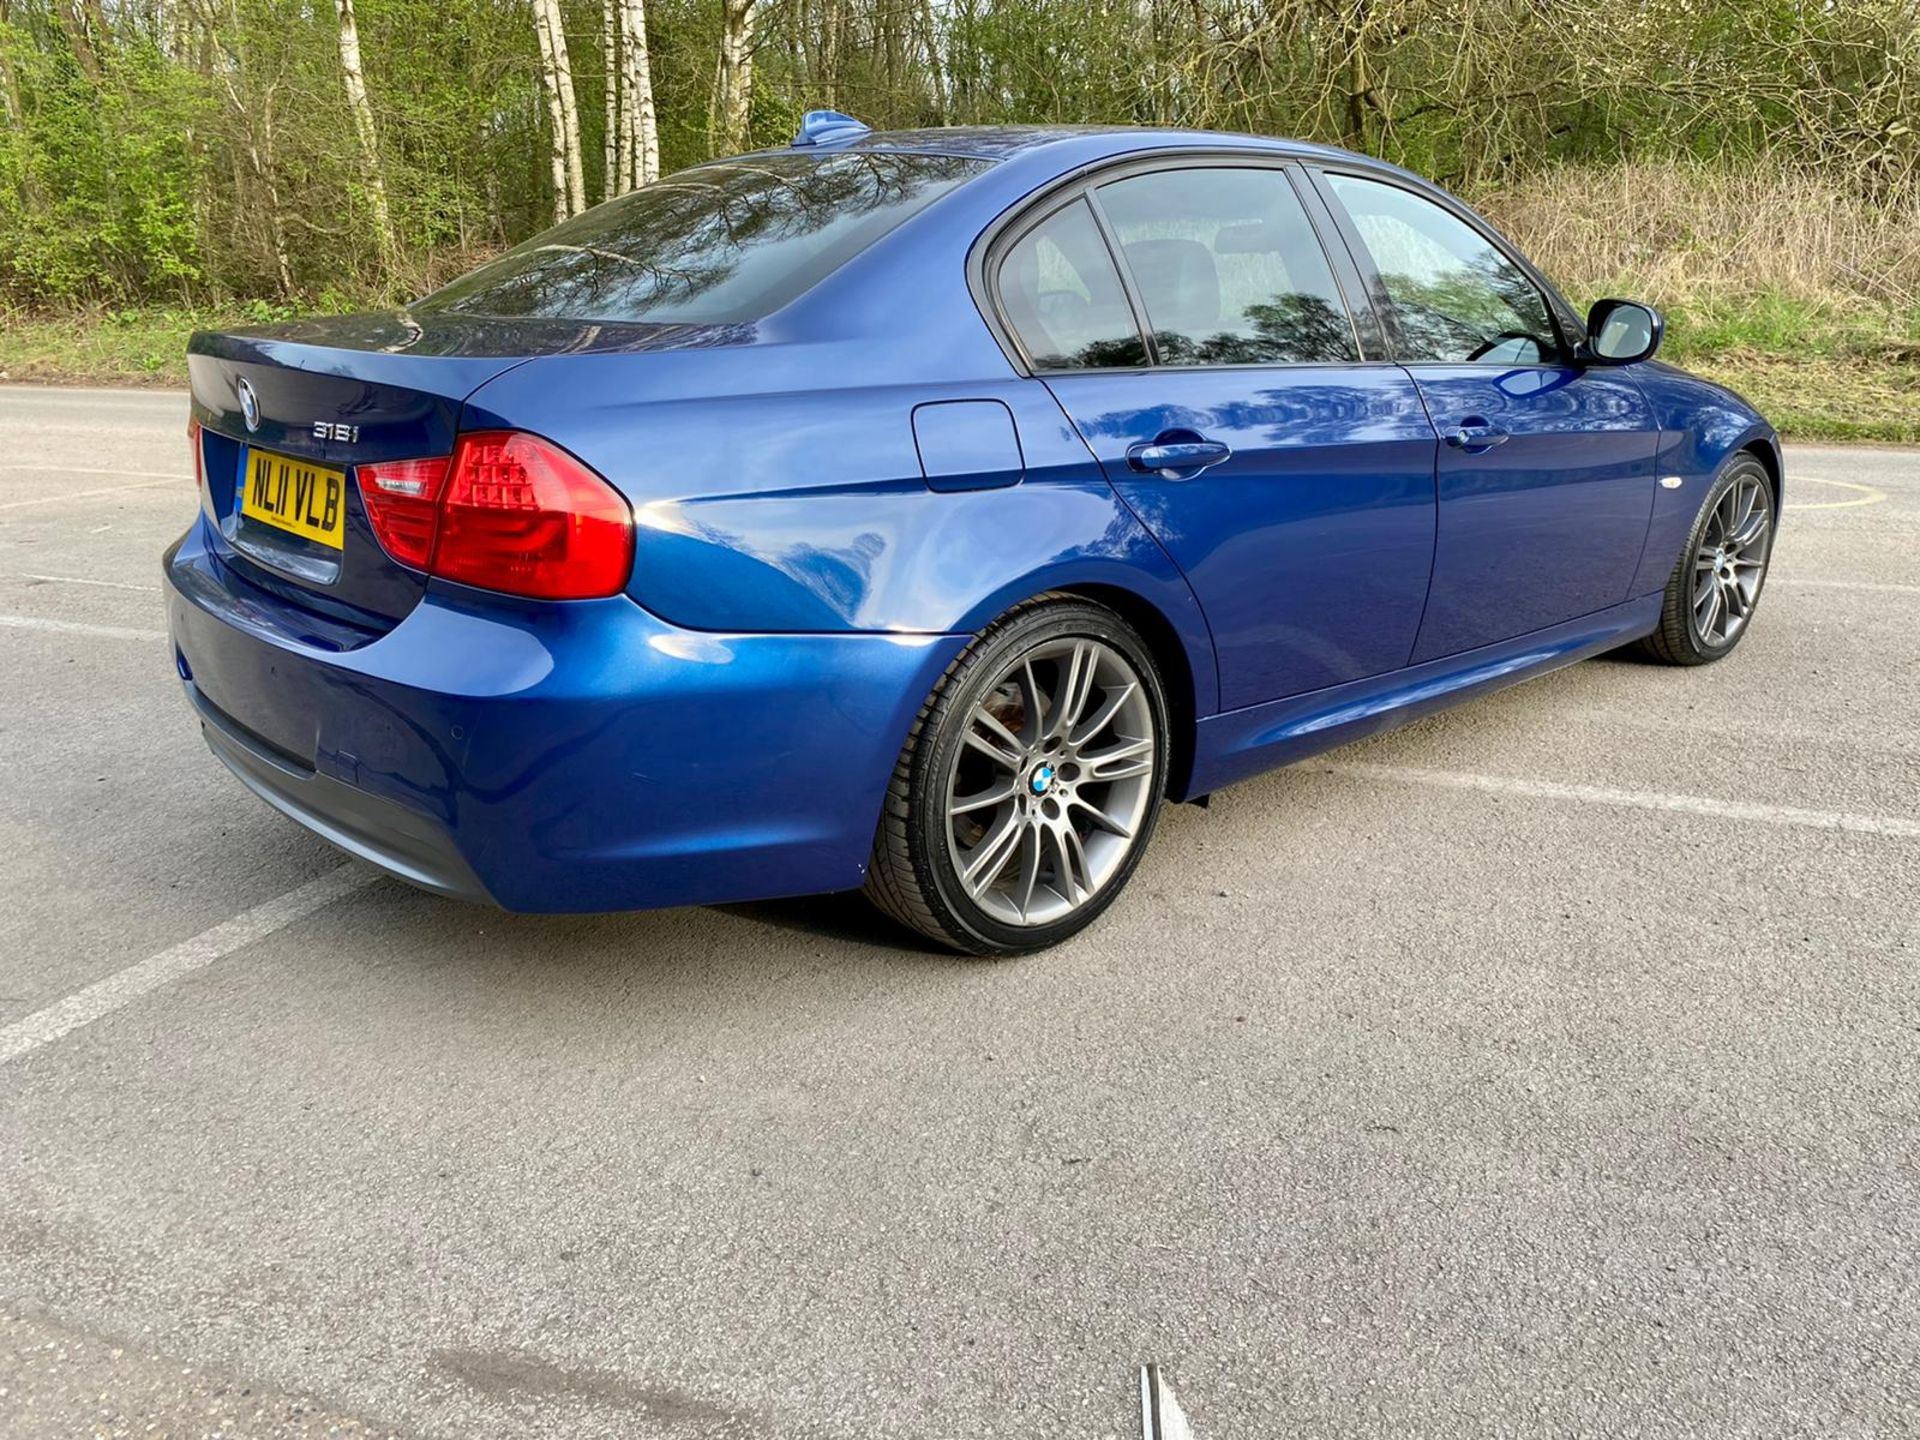 2011 BMW 318I SPORT PLUS EDITION BLUE SALOON, NEW TMING CHAIN, NEW 2 PIECE CLUTCH KIT *NO VAT* - Image 3 of 5